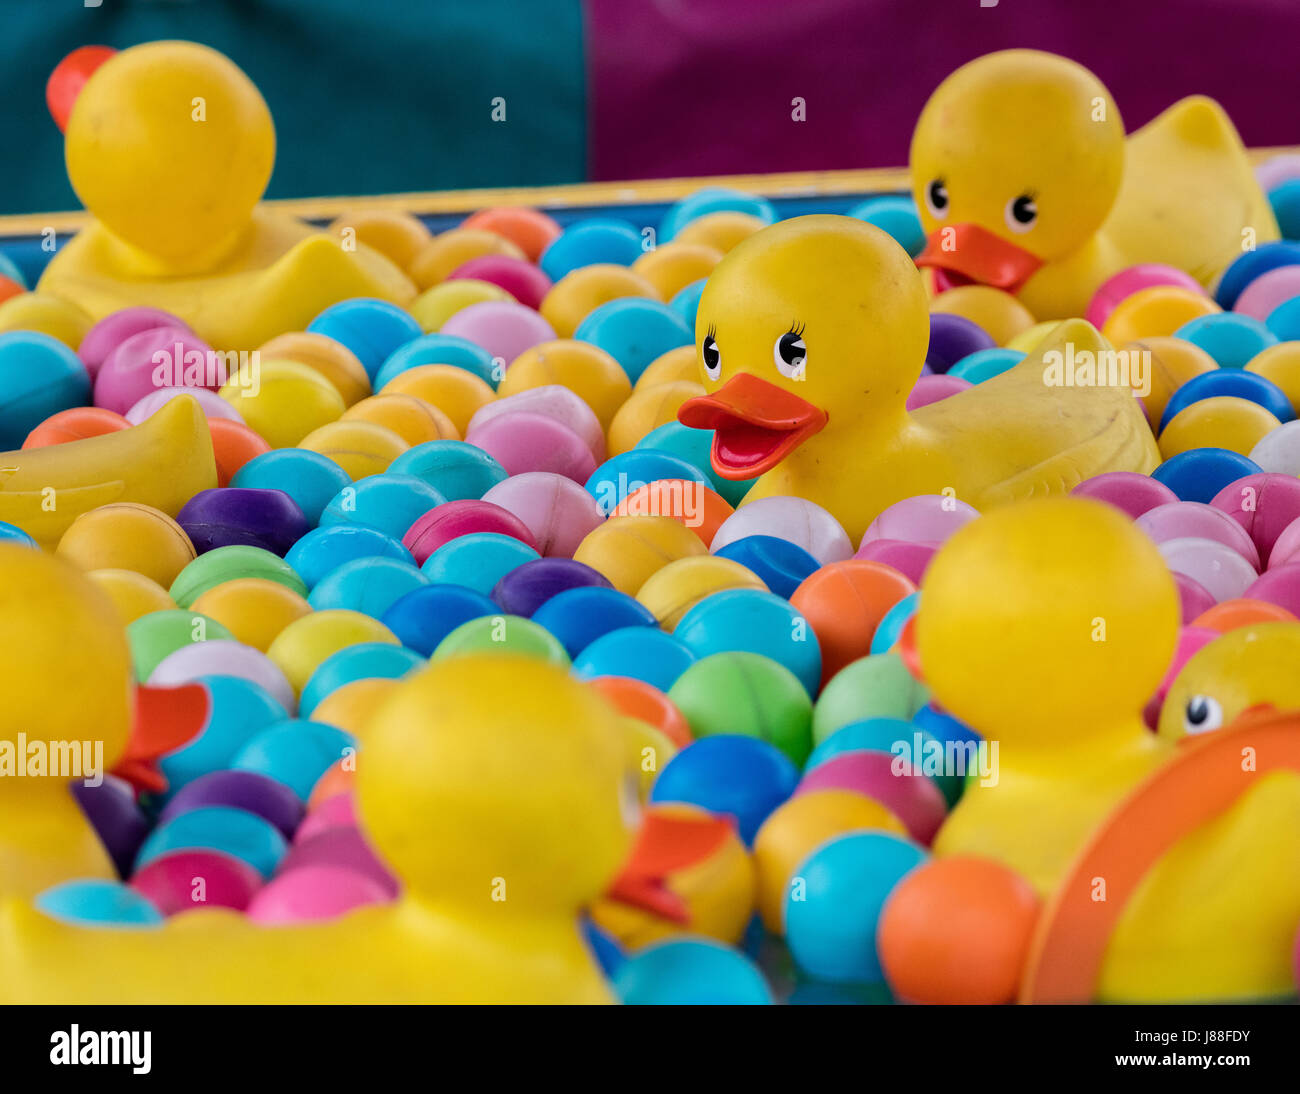 Rubber duck game on the midway of a county fair Stock Photo - Alamy